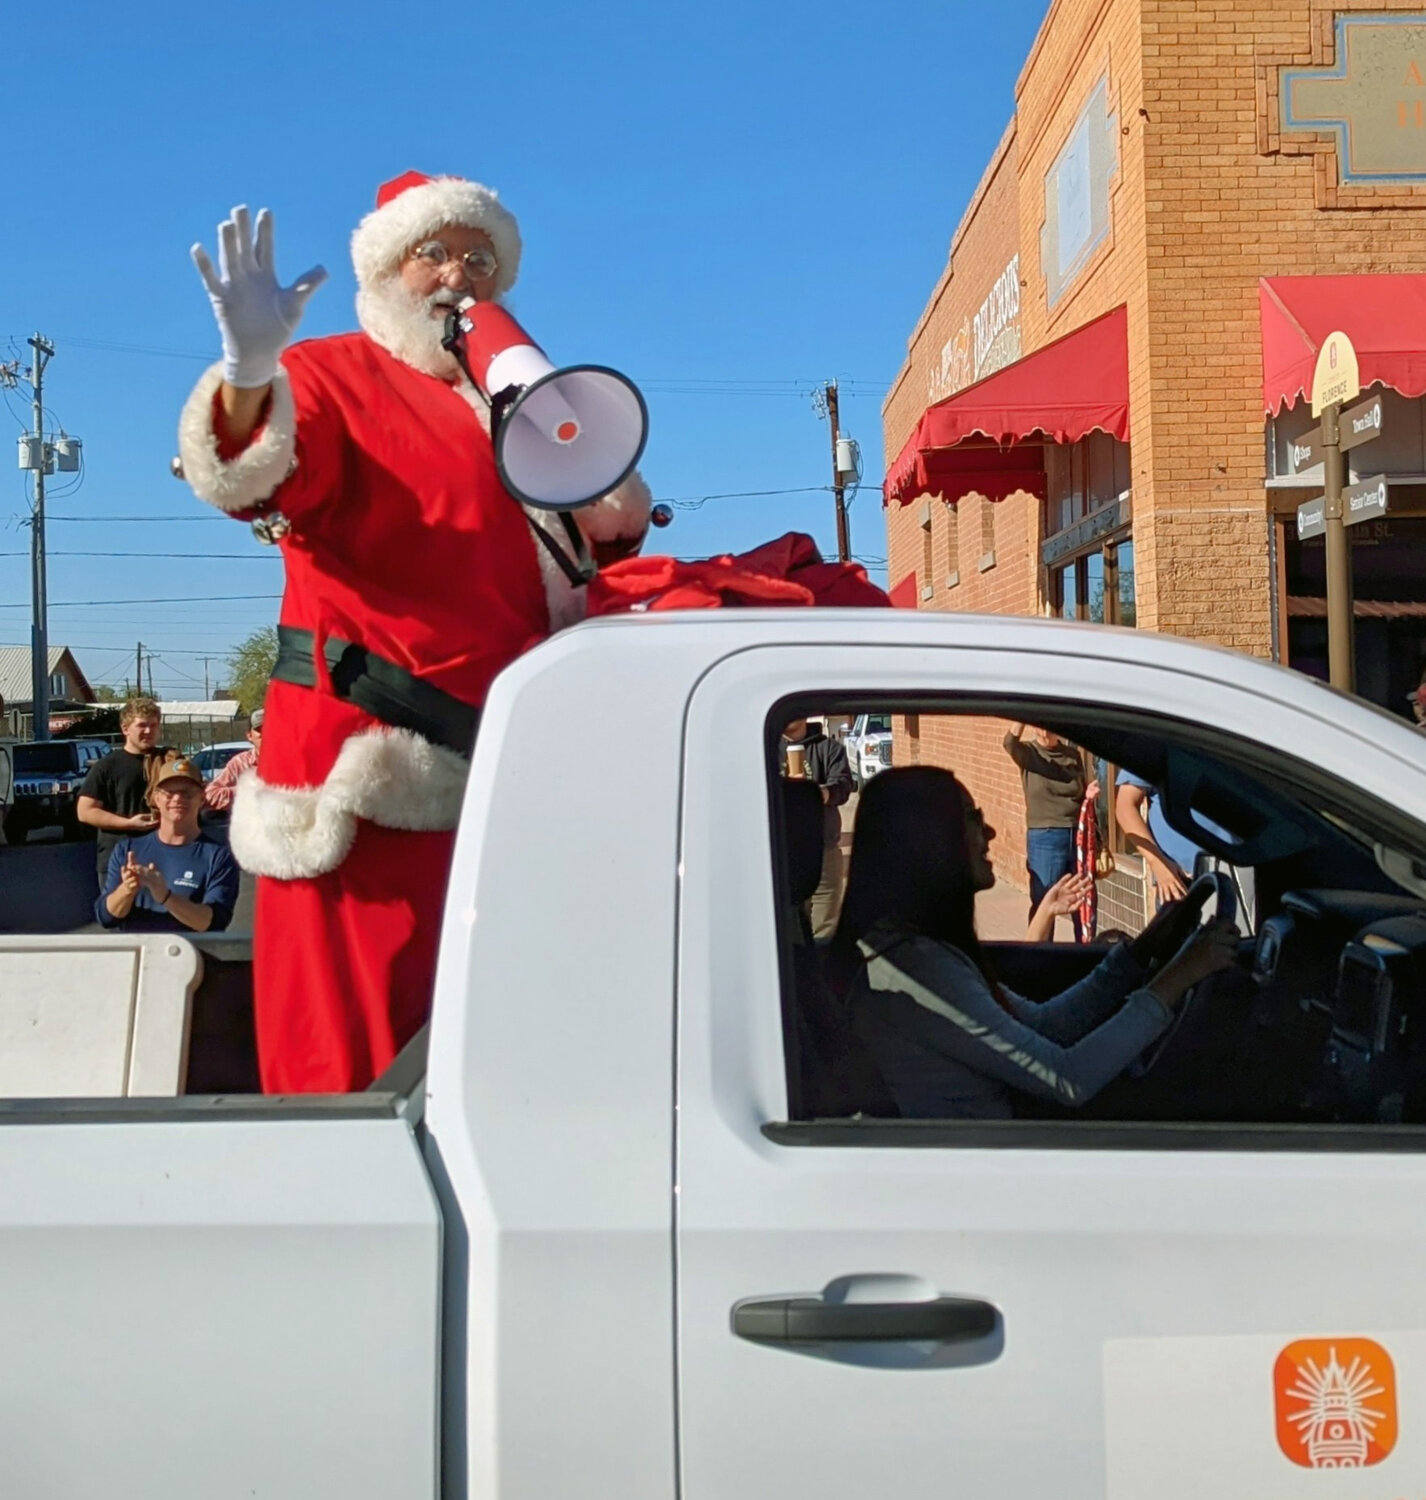 Santa made an appearance at the Junior Parada Parade over the weekend. Now the town has a program for kids to send letters to Old Sr. Nick.